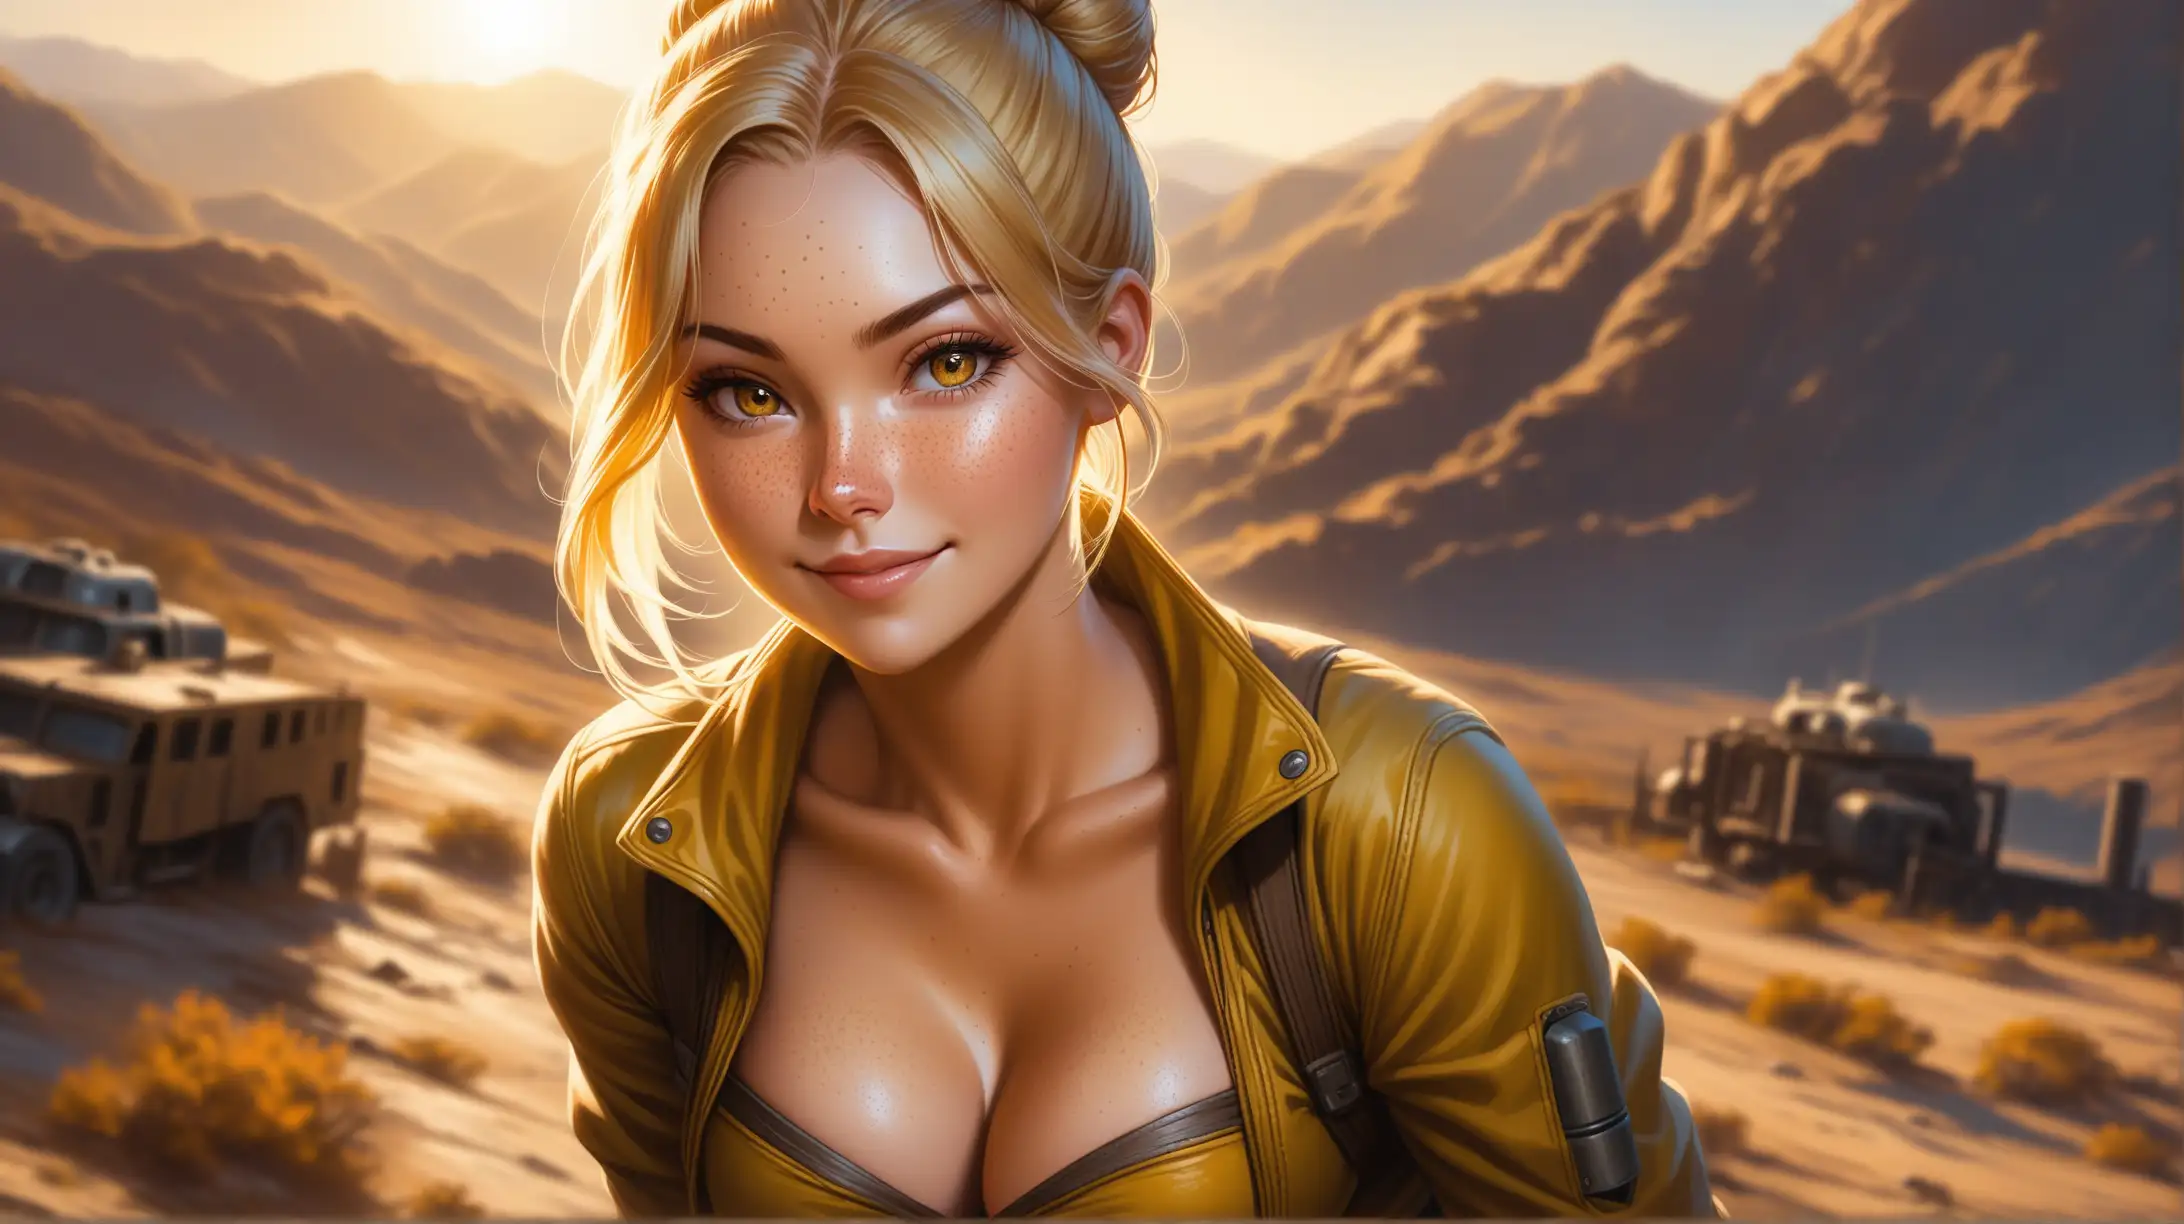 Draw a woman, long blonde hair in a bun, gold eyes, freckles, perky body, outfit inspired from Fallout, high quality, realistic, long shot, ambient lighting, outdoors, seductive pose, cleavage, smiling toward the viewer